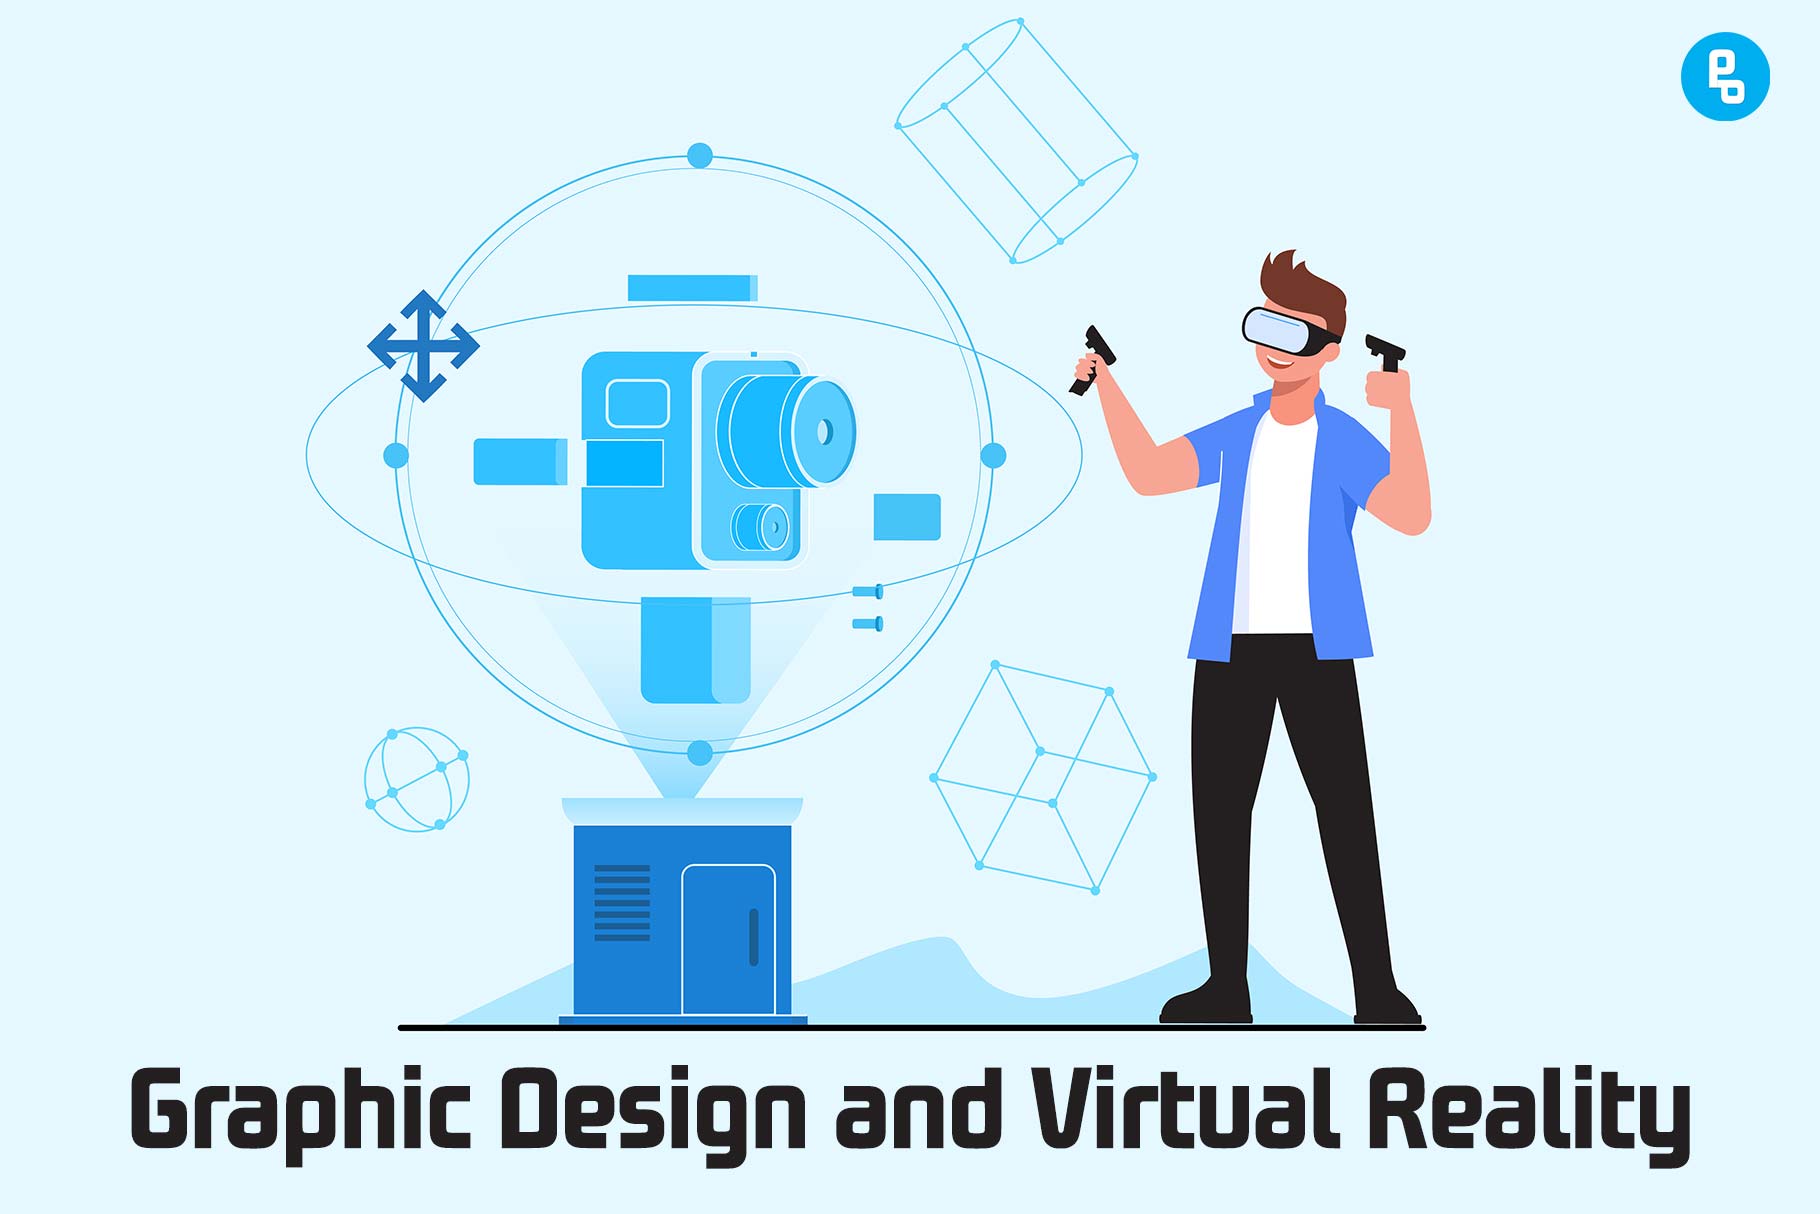 Throughout this guide, we will explore the intricacies of VR and examine how graphic design plays an important role in creating a memorable experience.